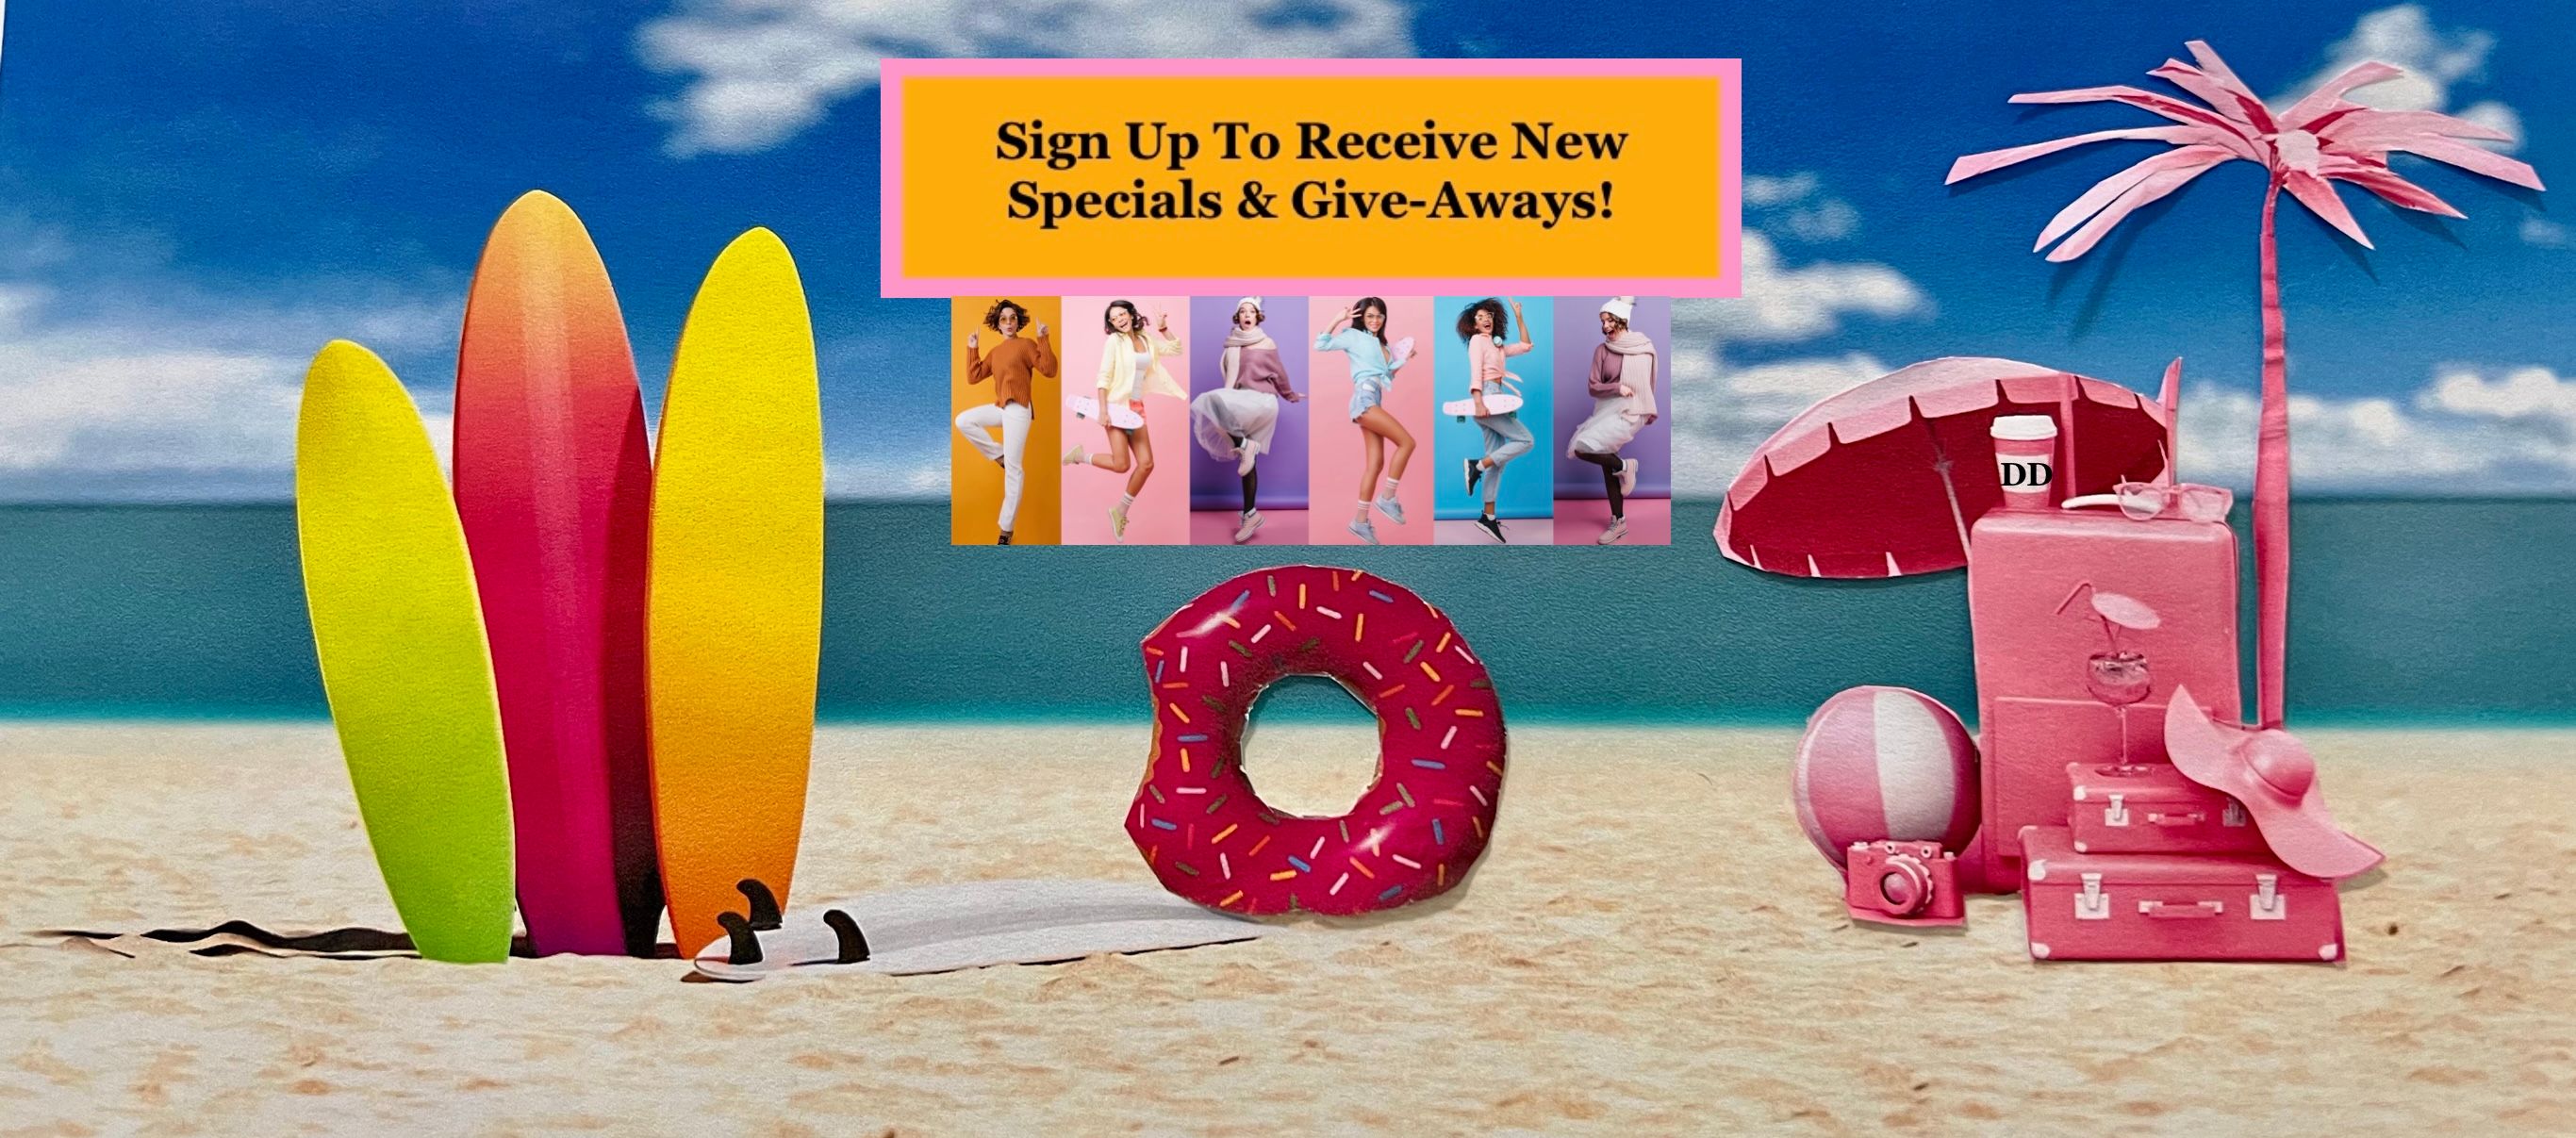 Sign ups to give specials & give-always to customers. Surfboards on beach sand, in front of ocean, inner tube, pink umbrella, pink beach ball, pink suitcases